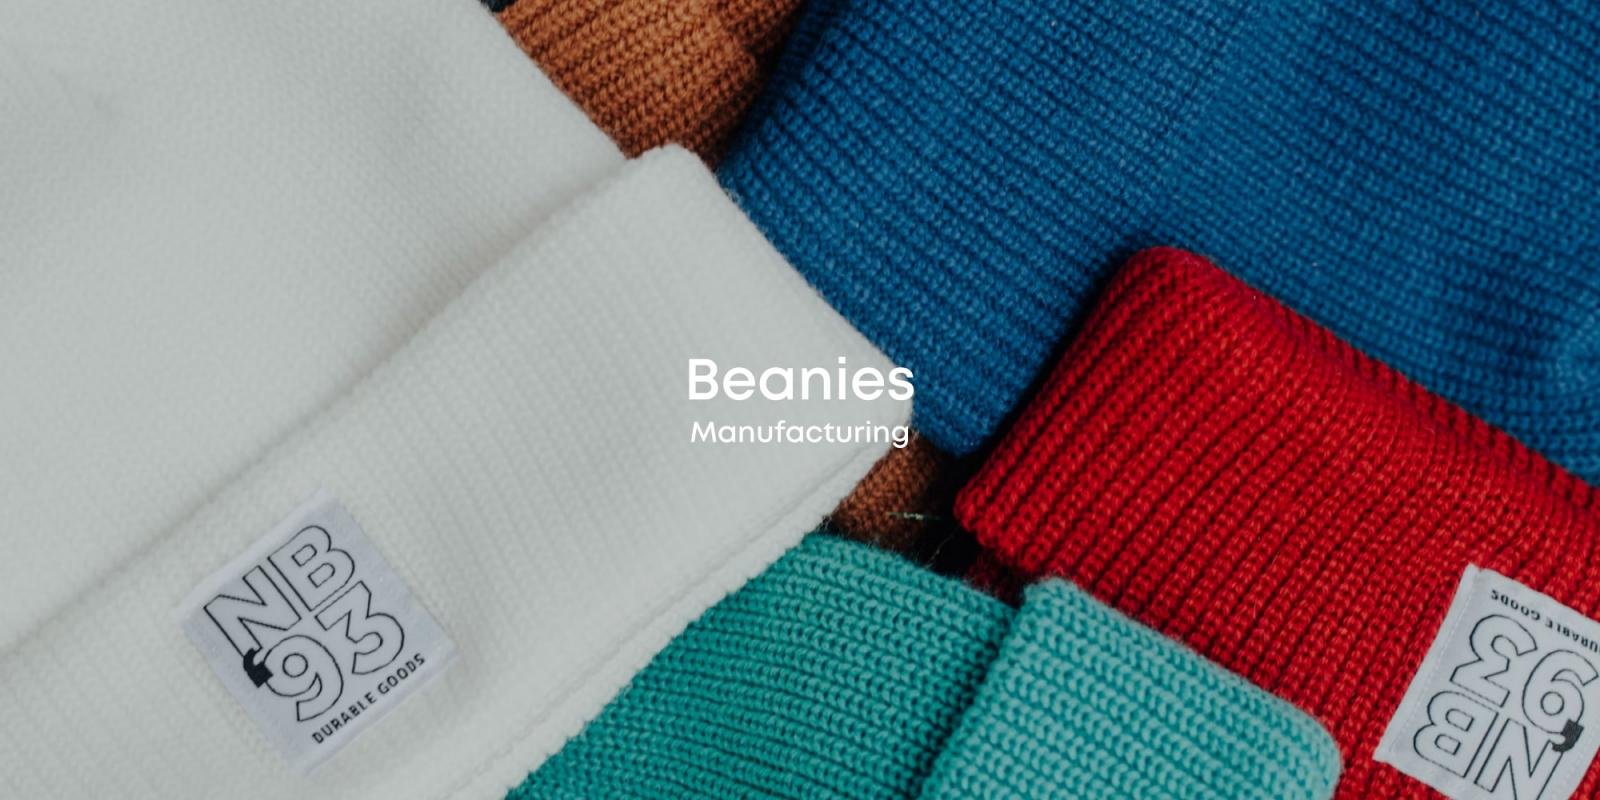 Beanies Manufacturing